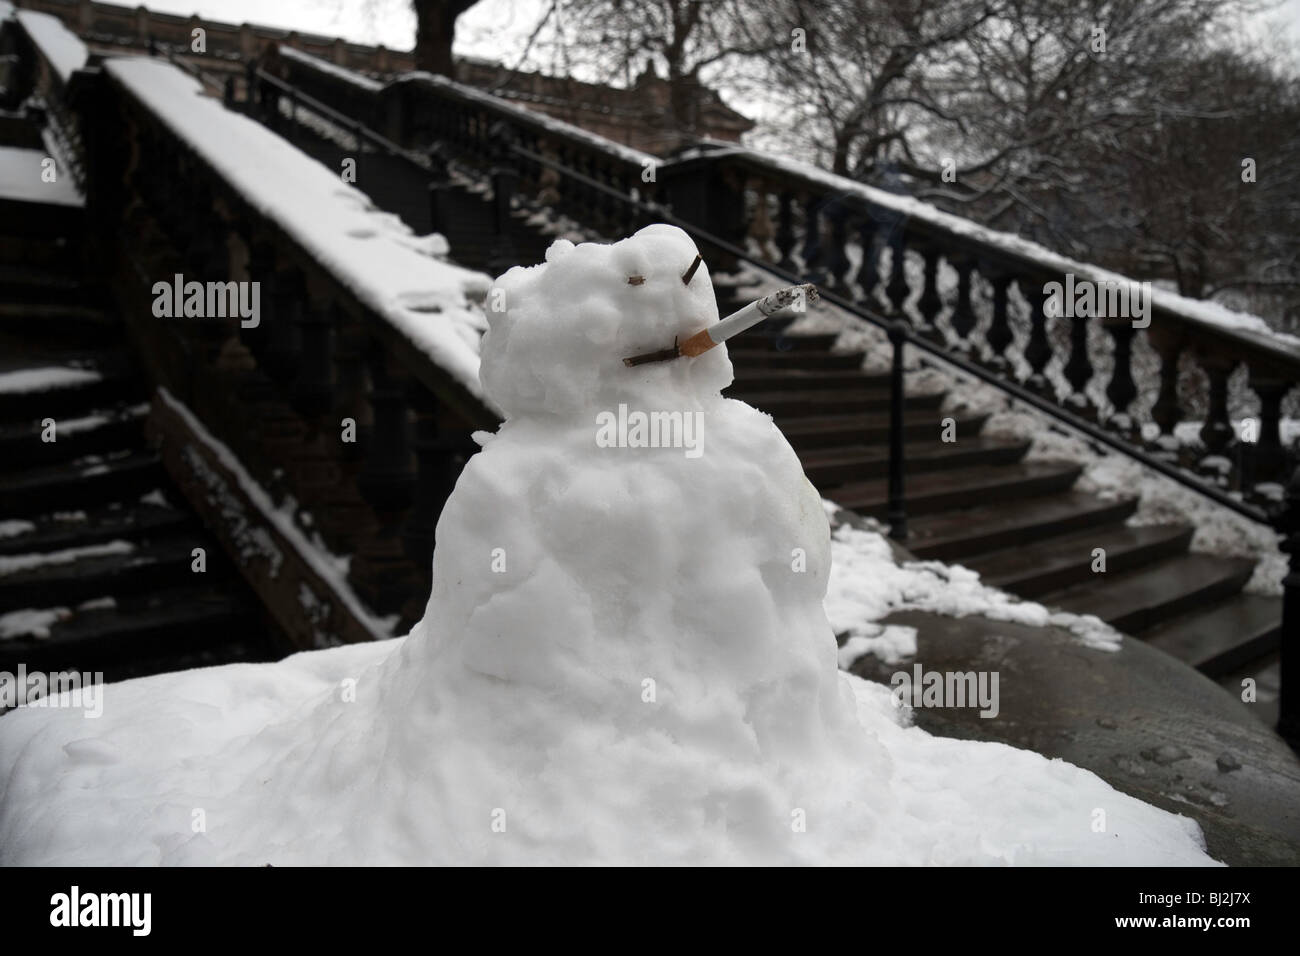 A mini snowman with a lit cigarette in its mouth atop a stone banister in Edinburgh's Princes Street Gardens Stock Photo